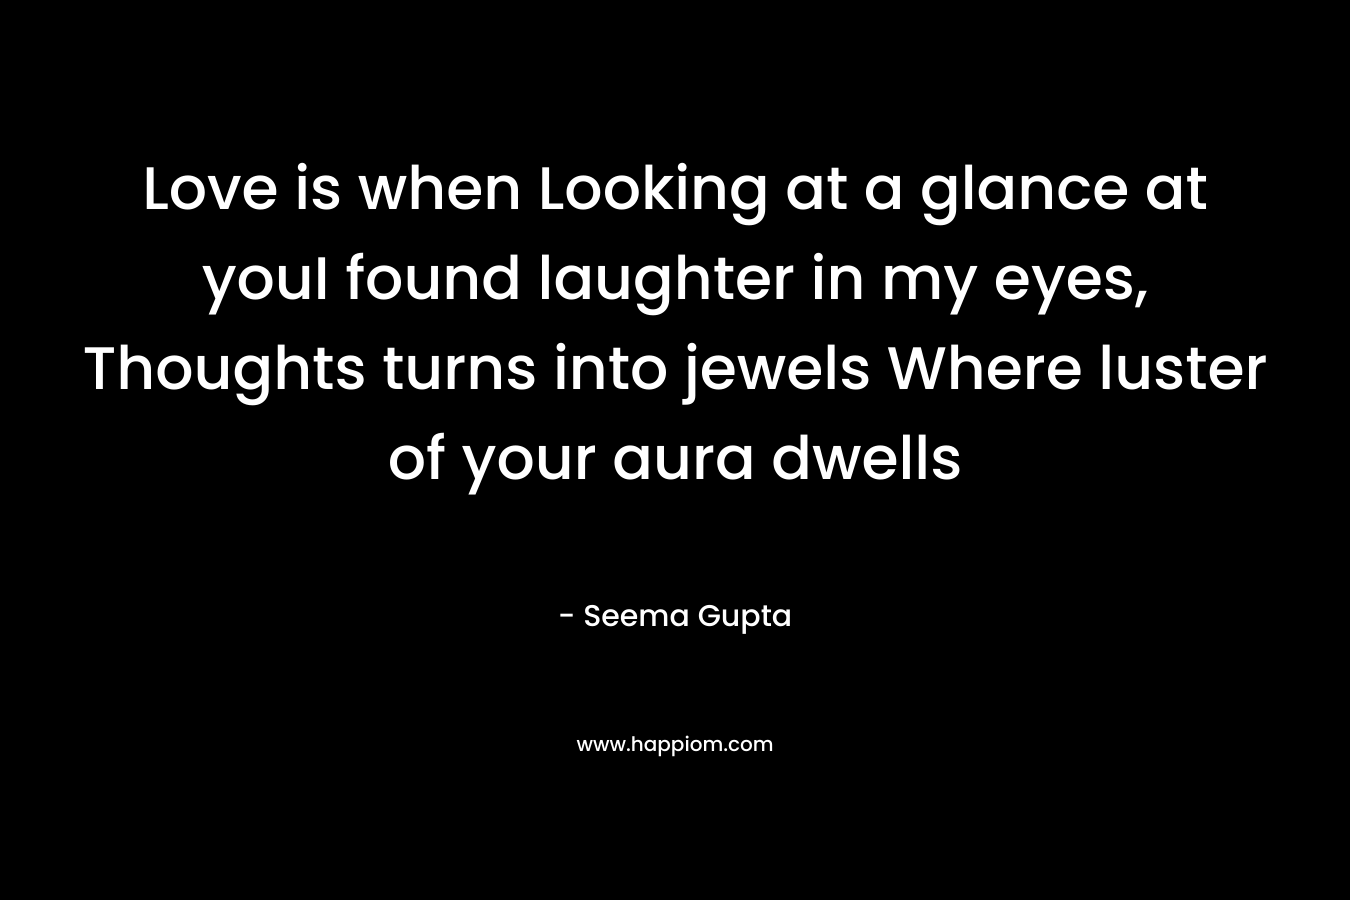 Love is when Looking at a glance at youI found laughter in my eyes, Thoughts turns into jewels Where luster of your aura dwells – Seema Gupta